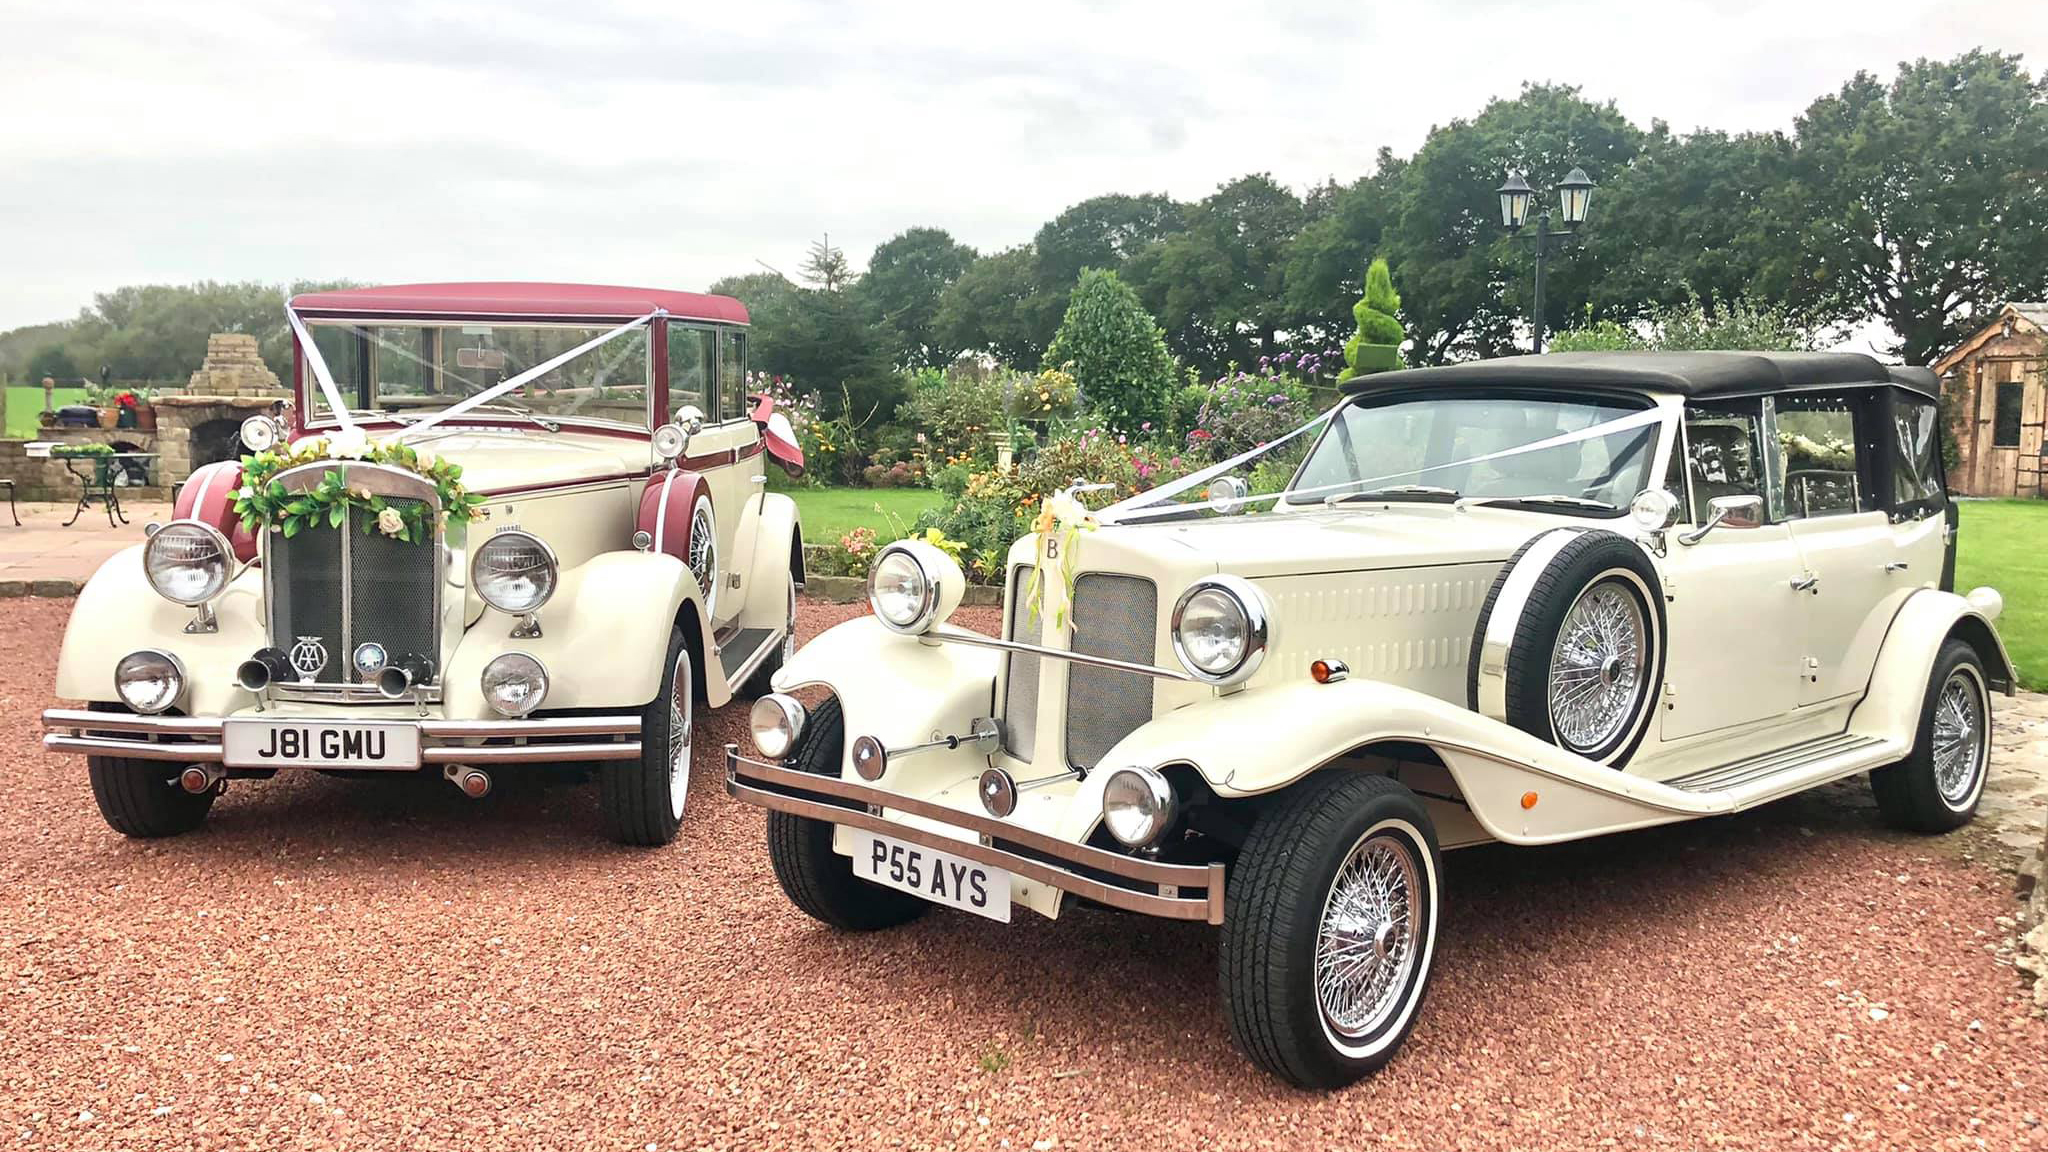 Two vintage wedding cars decorated with white ribbons and bows at a local Bamber Bridge wedding. Both vehicles are parked side-by-side